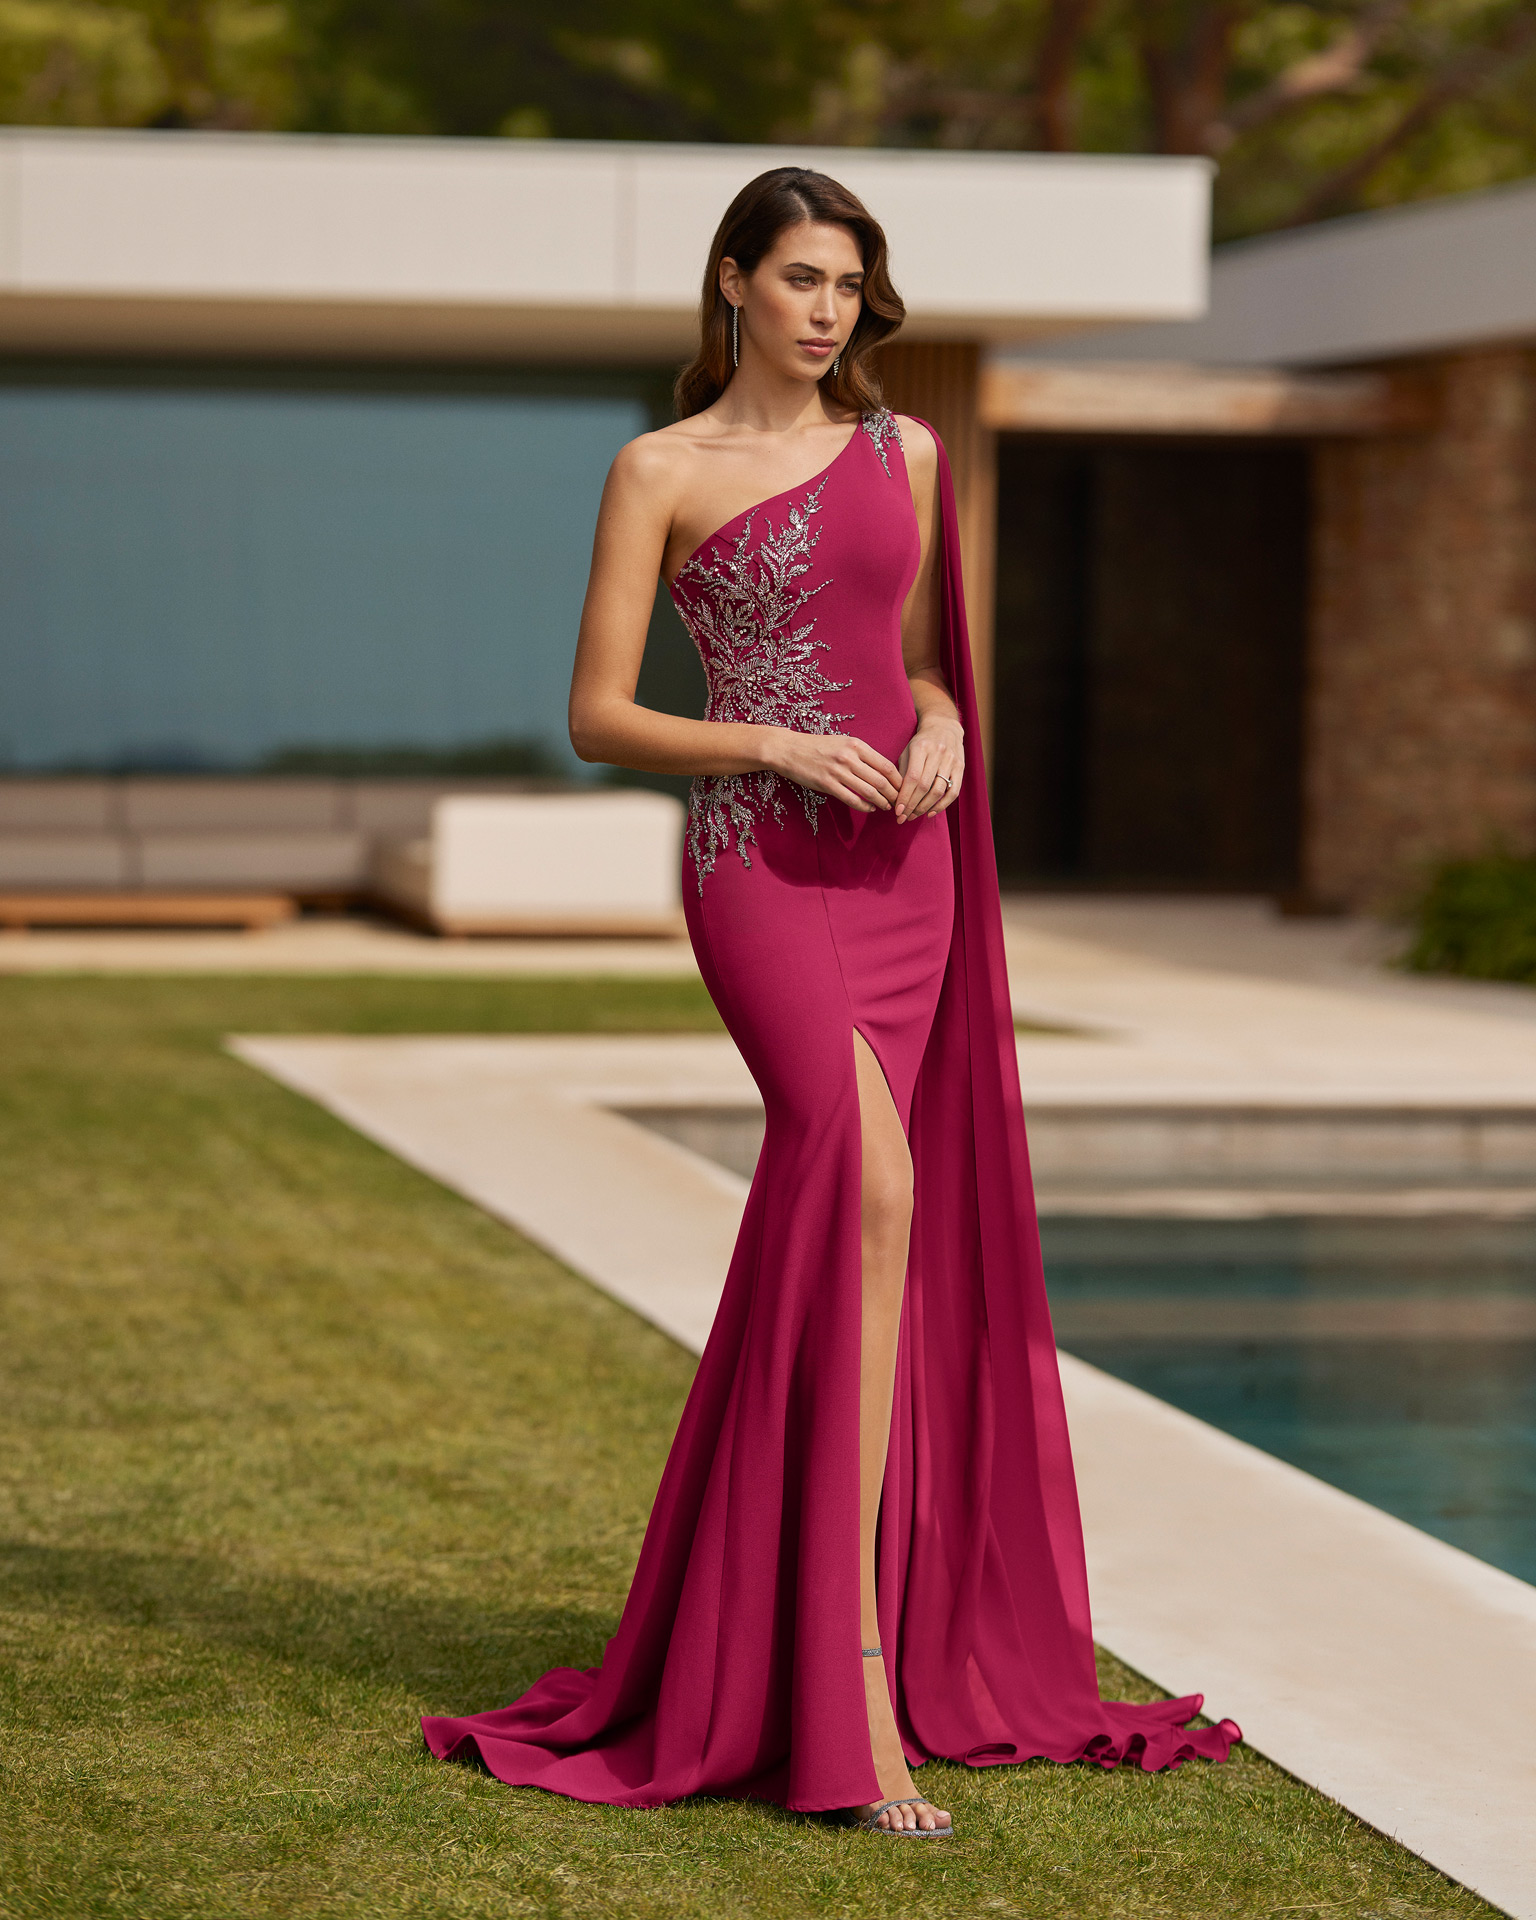 Elegant long gala dress. Made with crêpe embellished with beadwork. With asymmetrical neckline, closed back and cape. Marfil Barcelona on-trend look. MARFIL_BARCELONA.